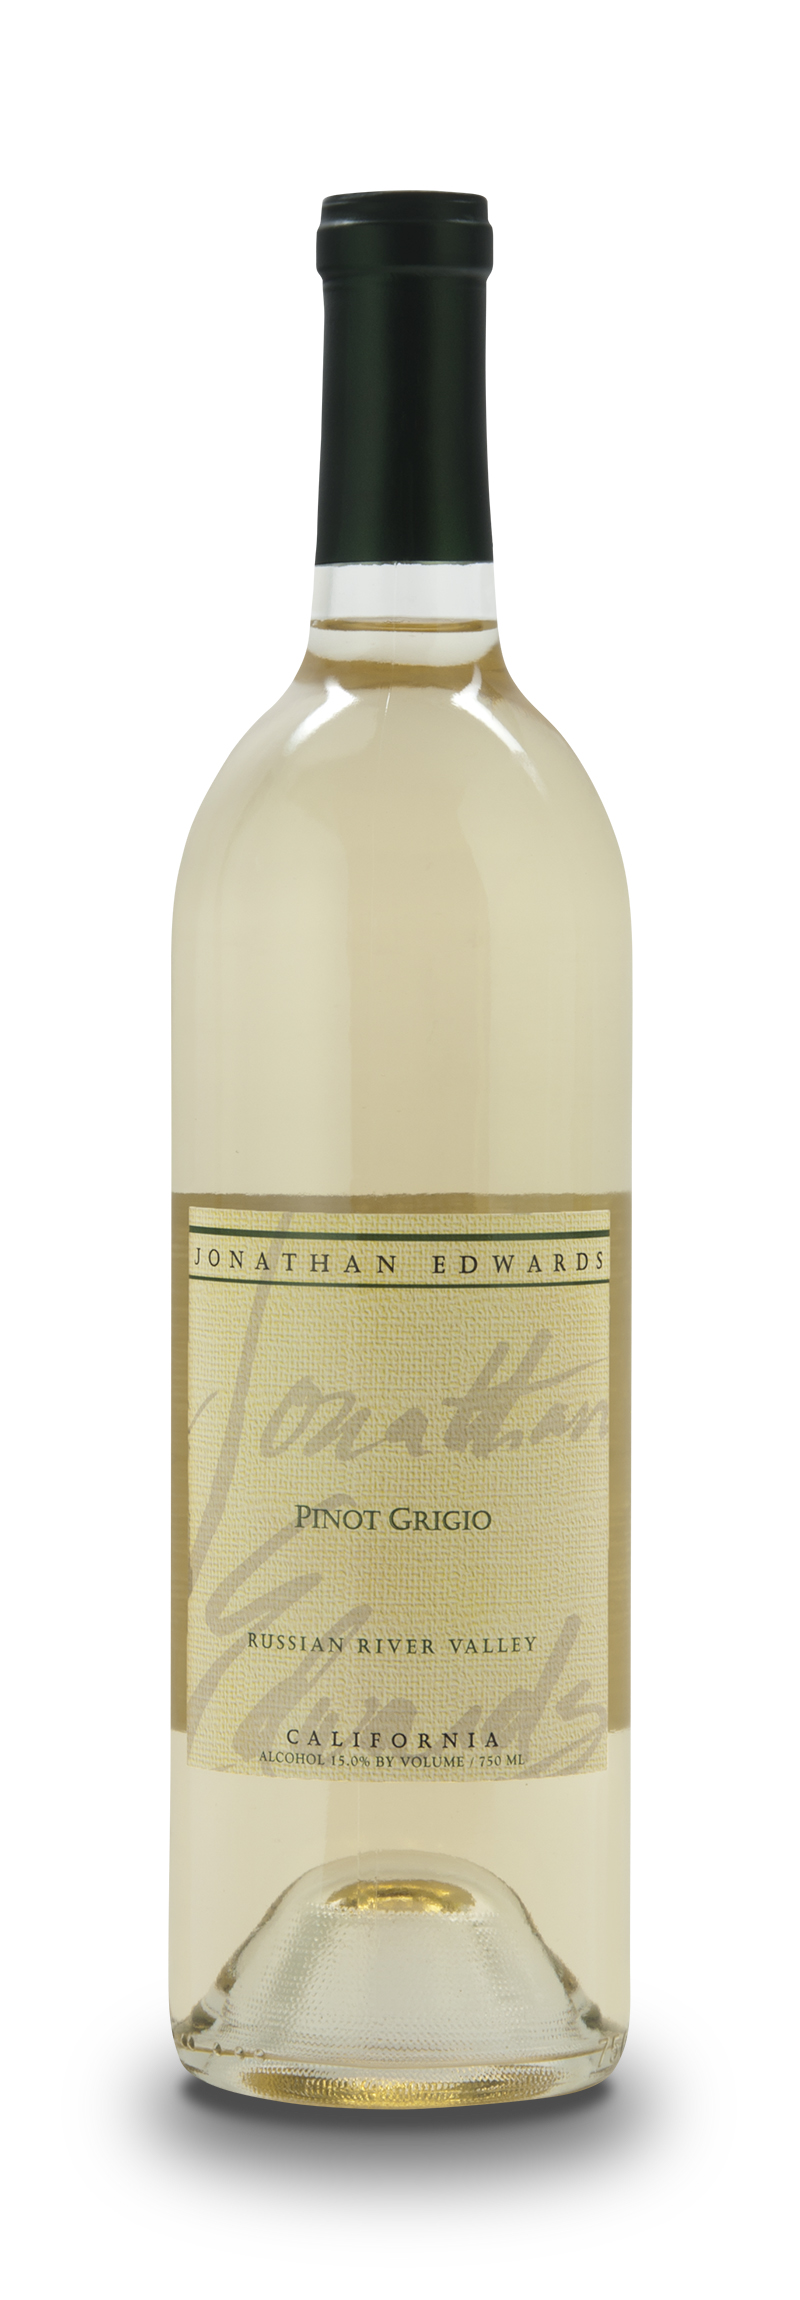 Product Image for 2019 Pinot Grigio